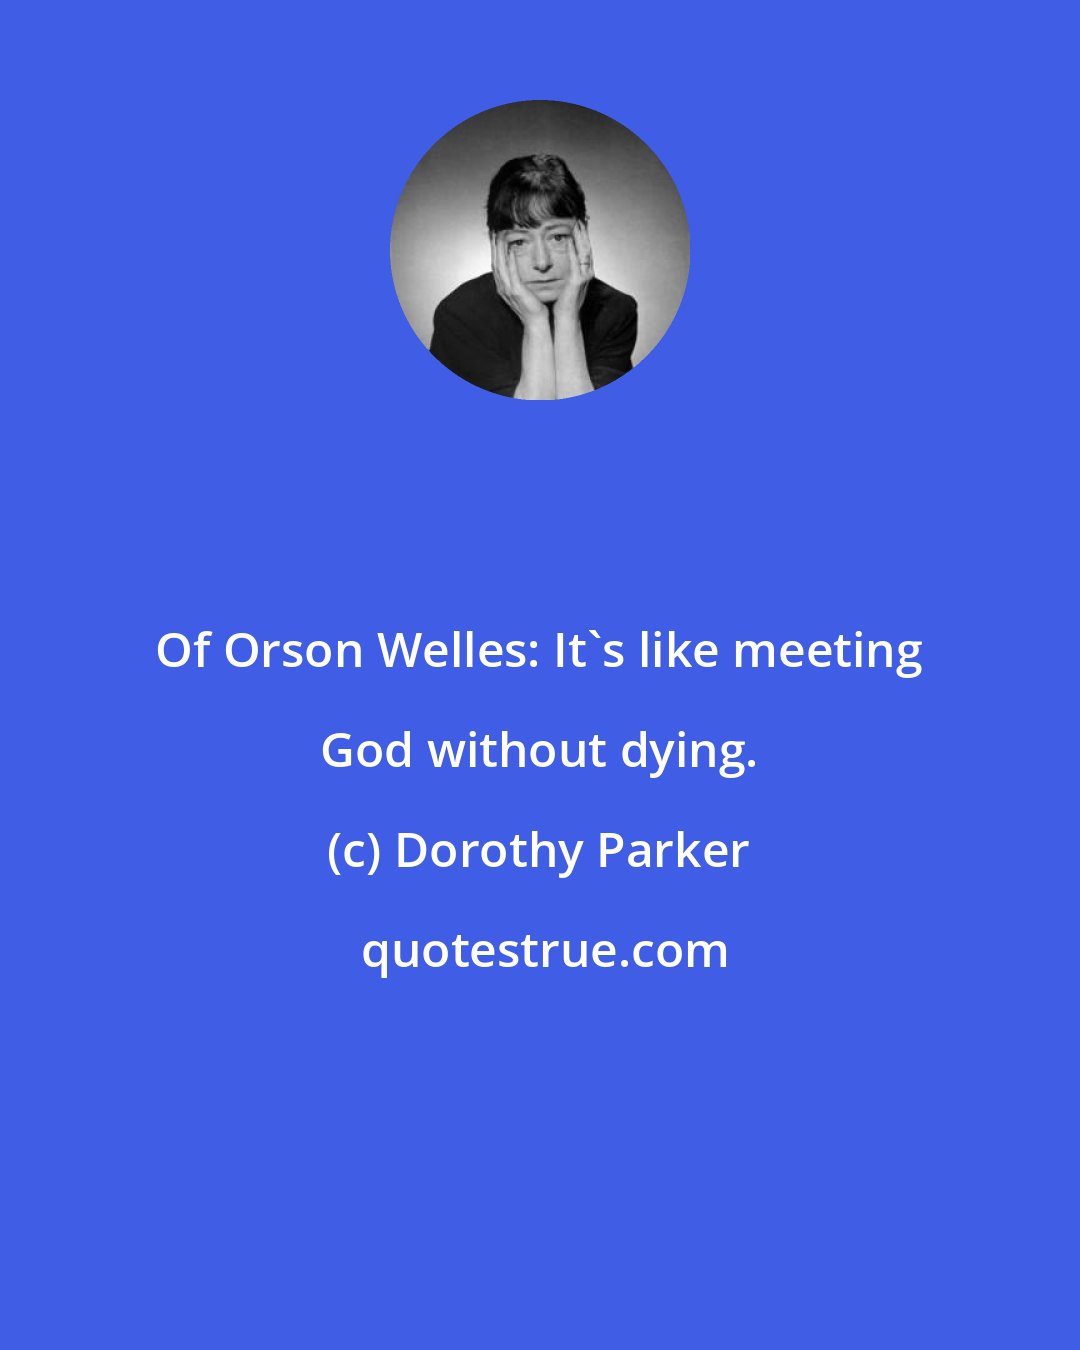 Dorothy Parker: Of Orson Welles: It's like meeting God without dying.